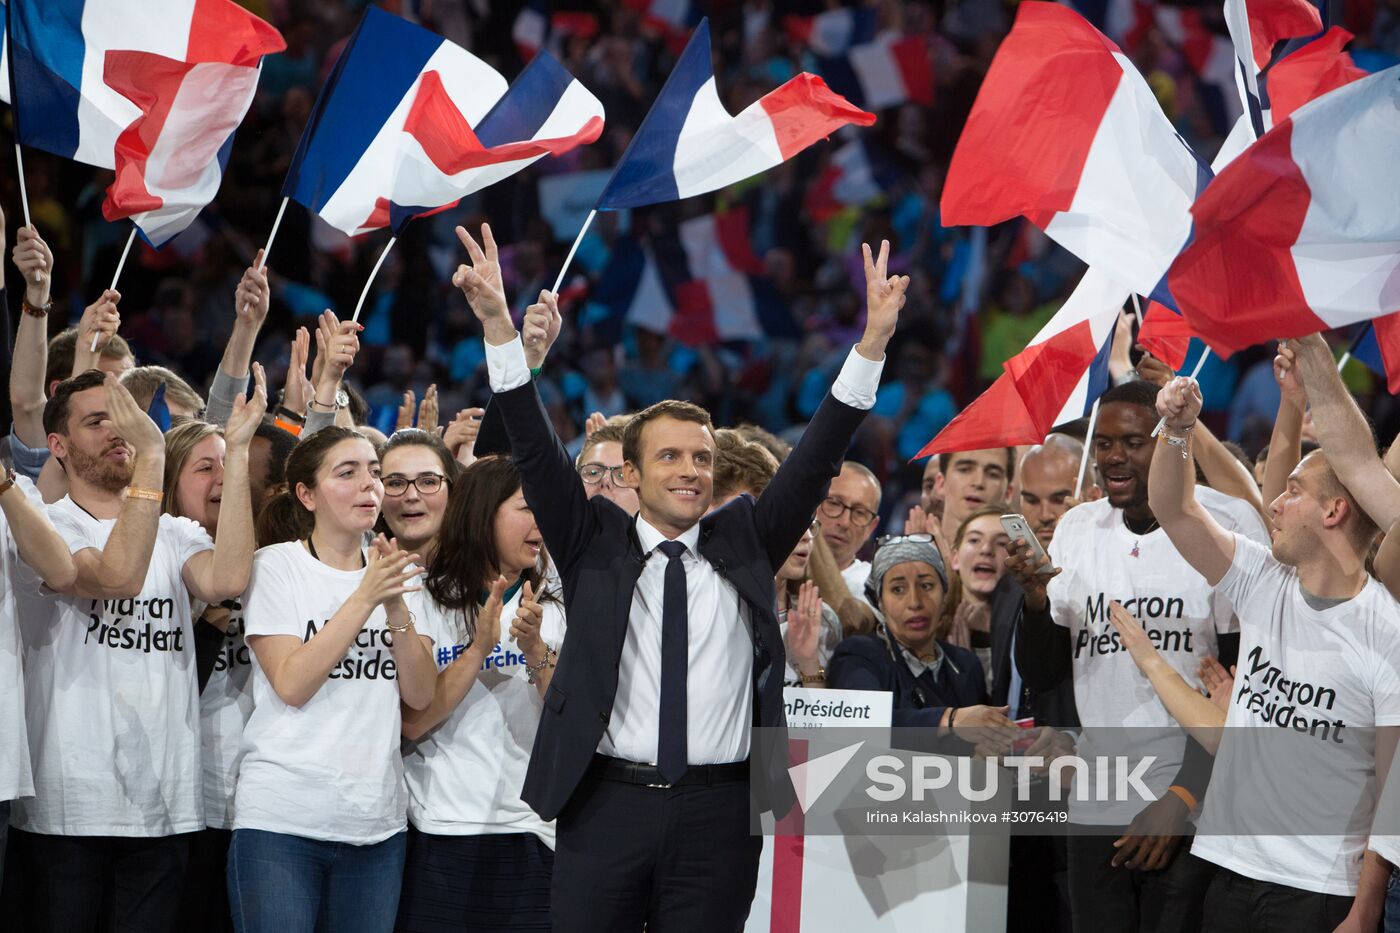 Presidential candidate Emmanuel Macron meets with supporters in Paris